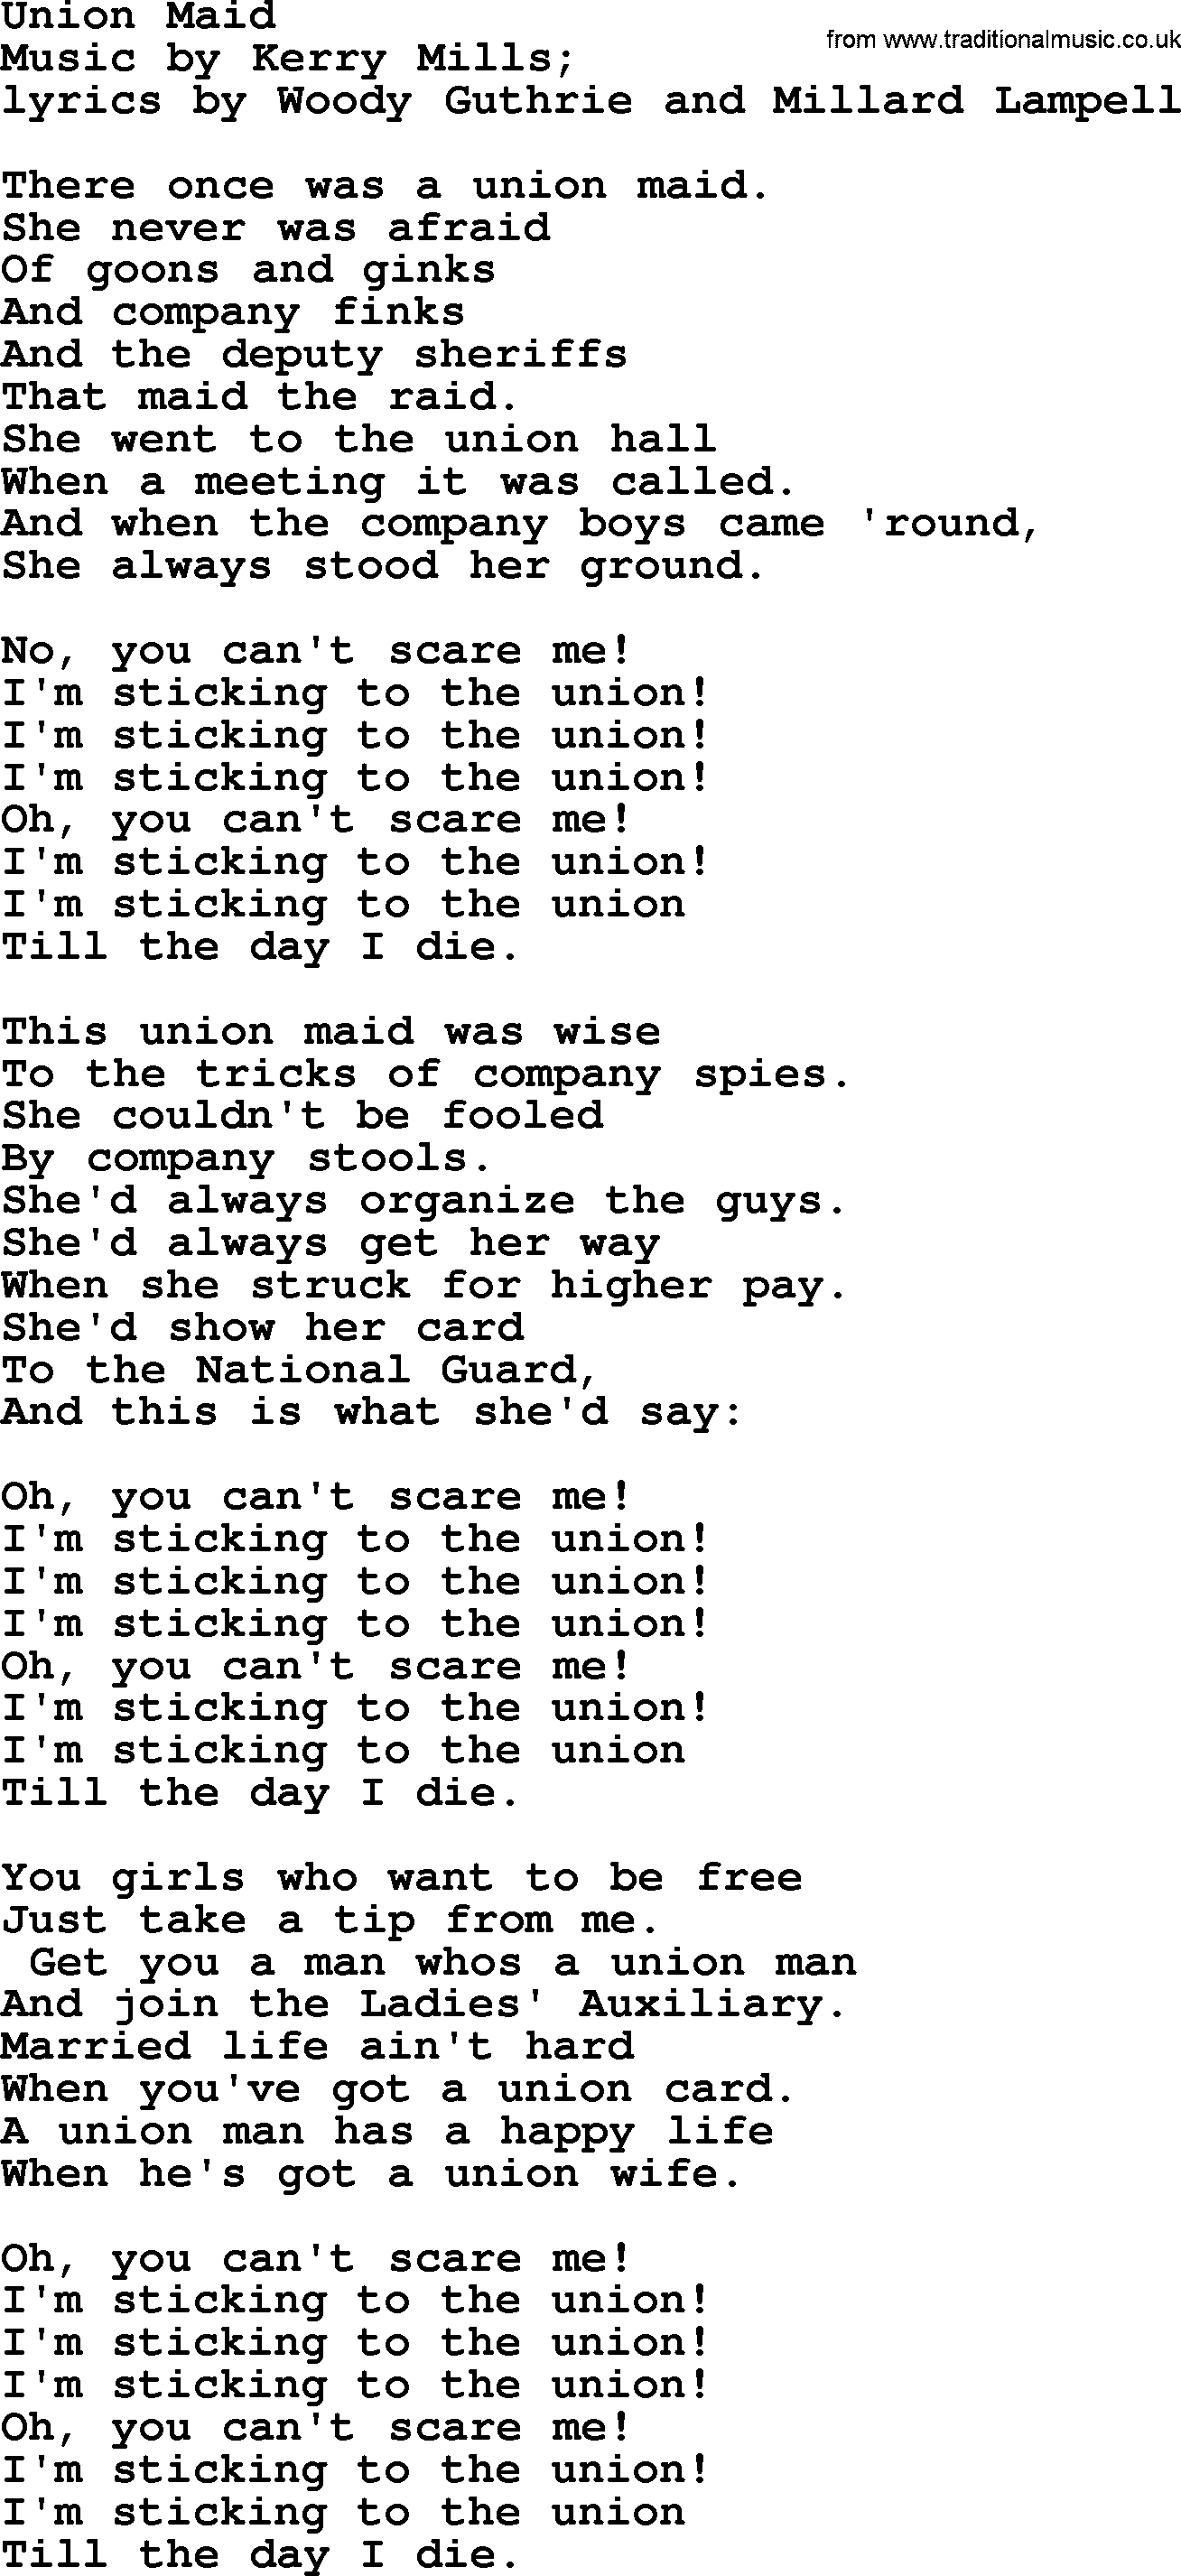 Political, Solidarity, Workers or Union song: Union Maid, lyrics